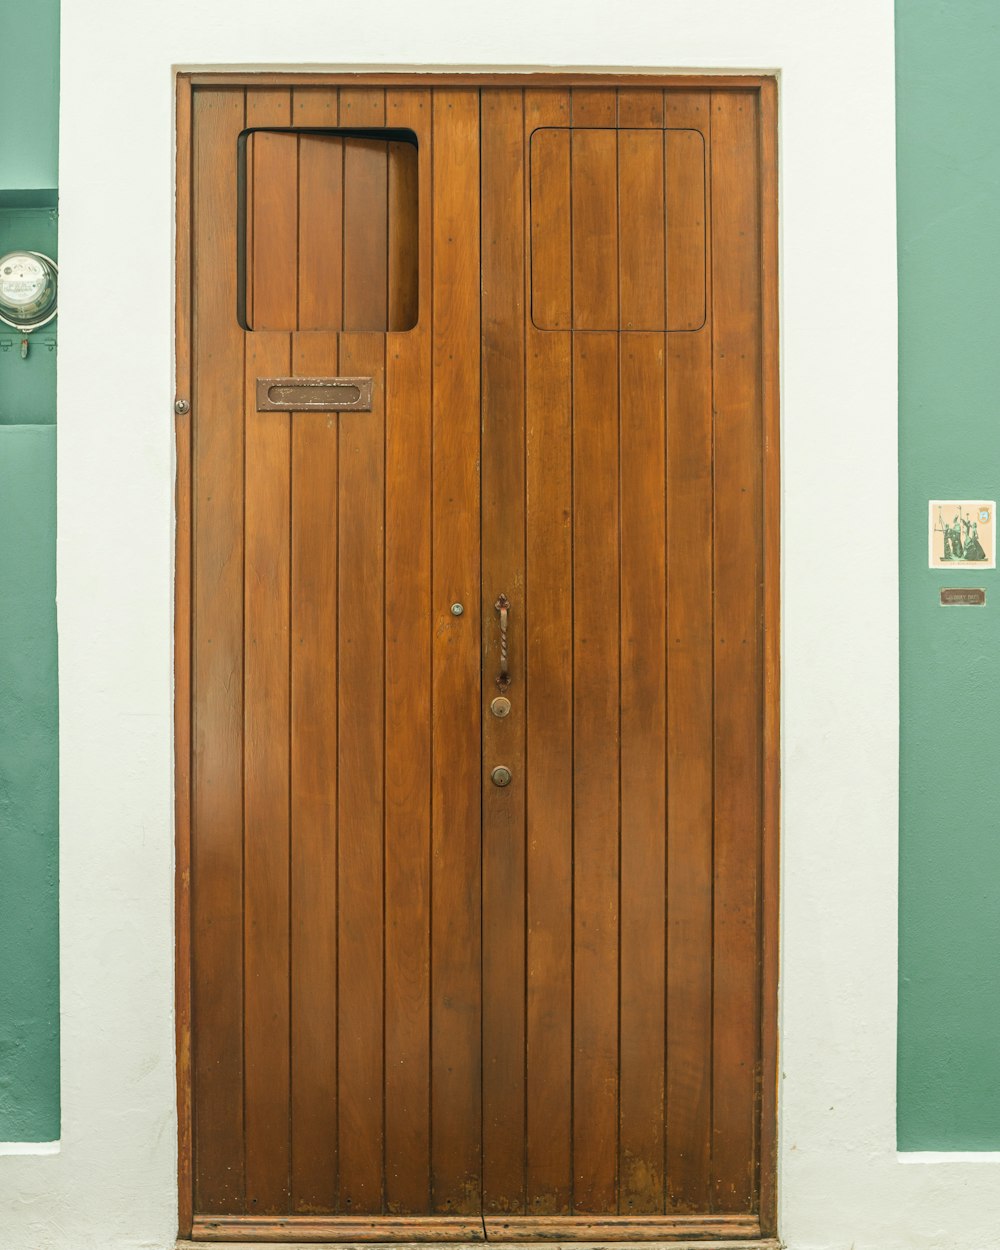 a wooden door with a clock on the side of it